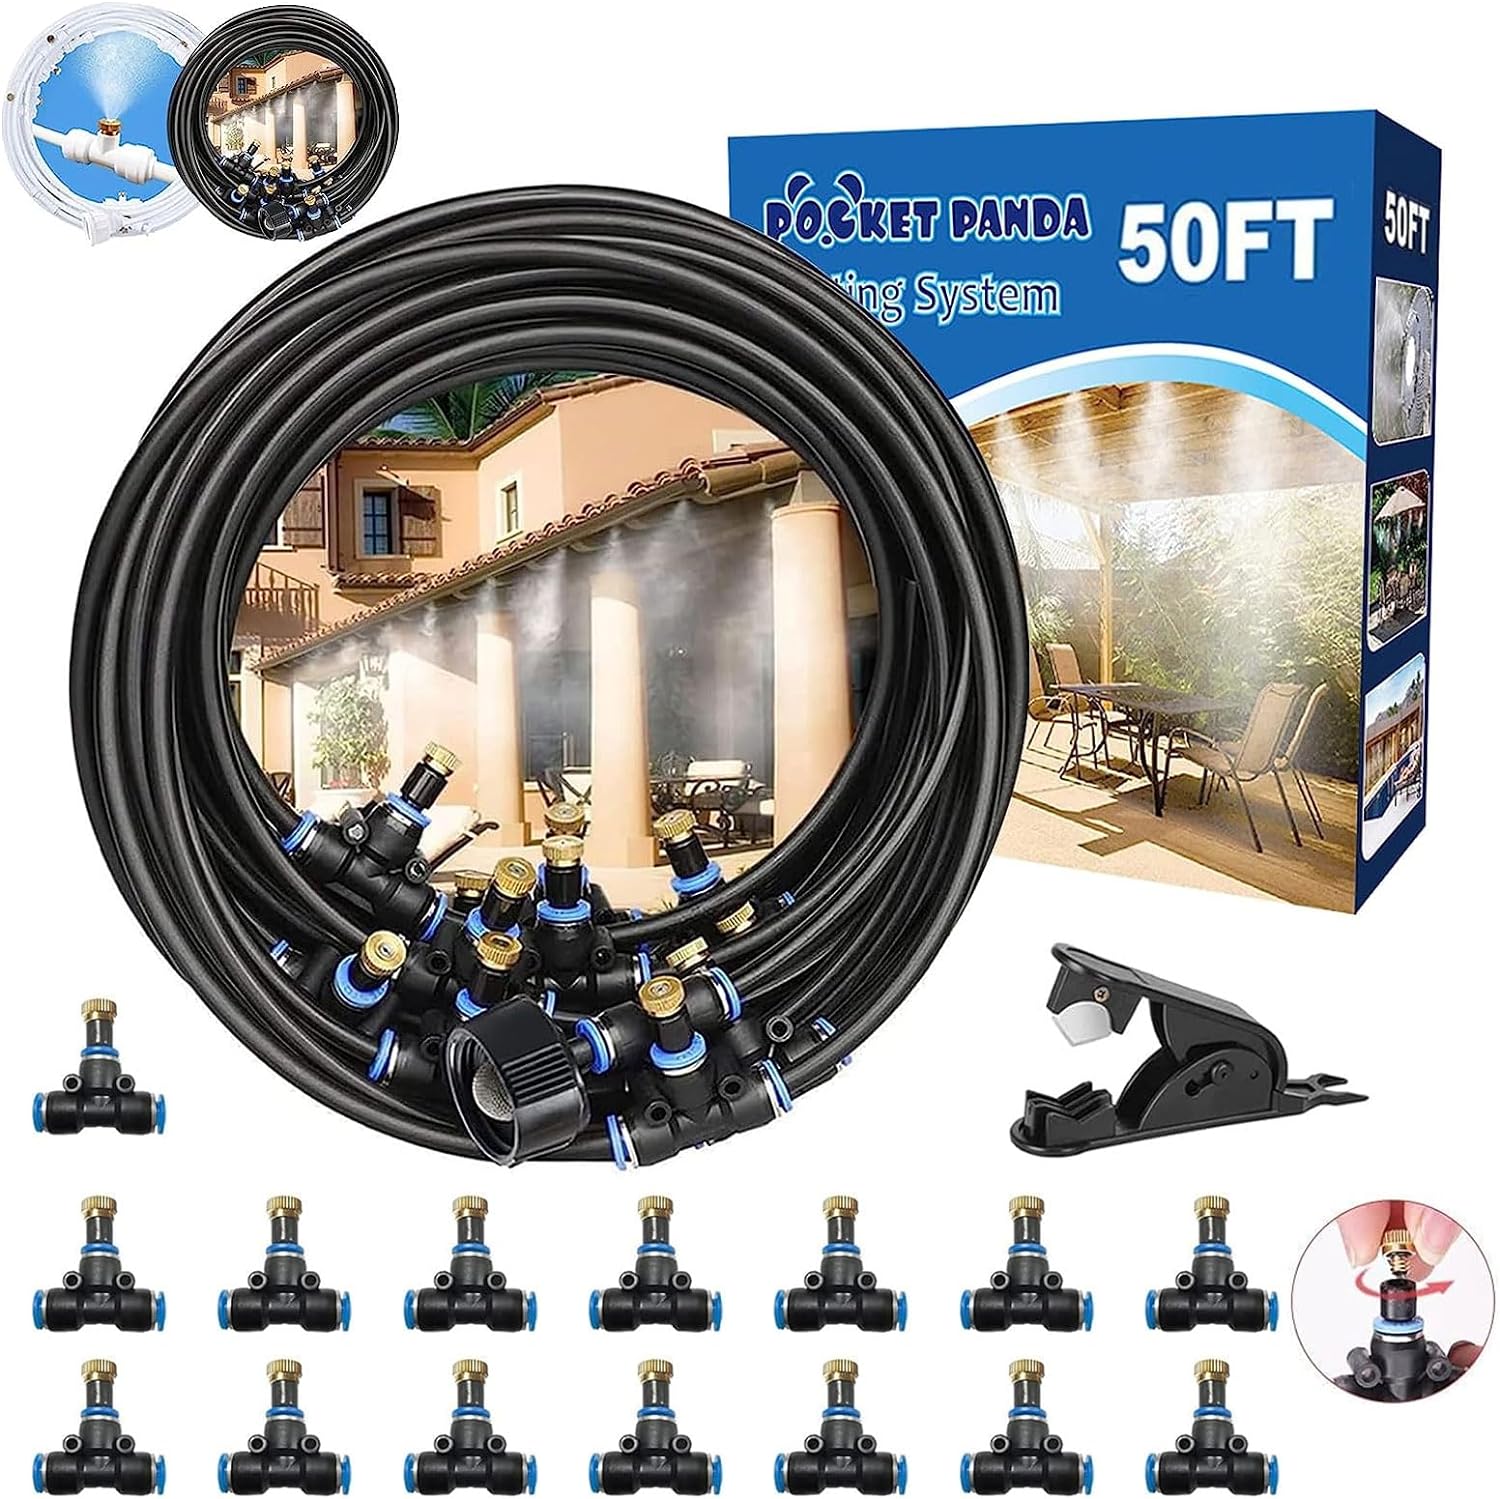 Misters for Outside Patio,Misting System for Cooling Outdoor,50Ft (15M)